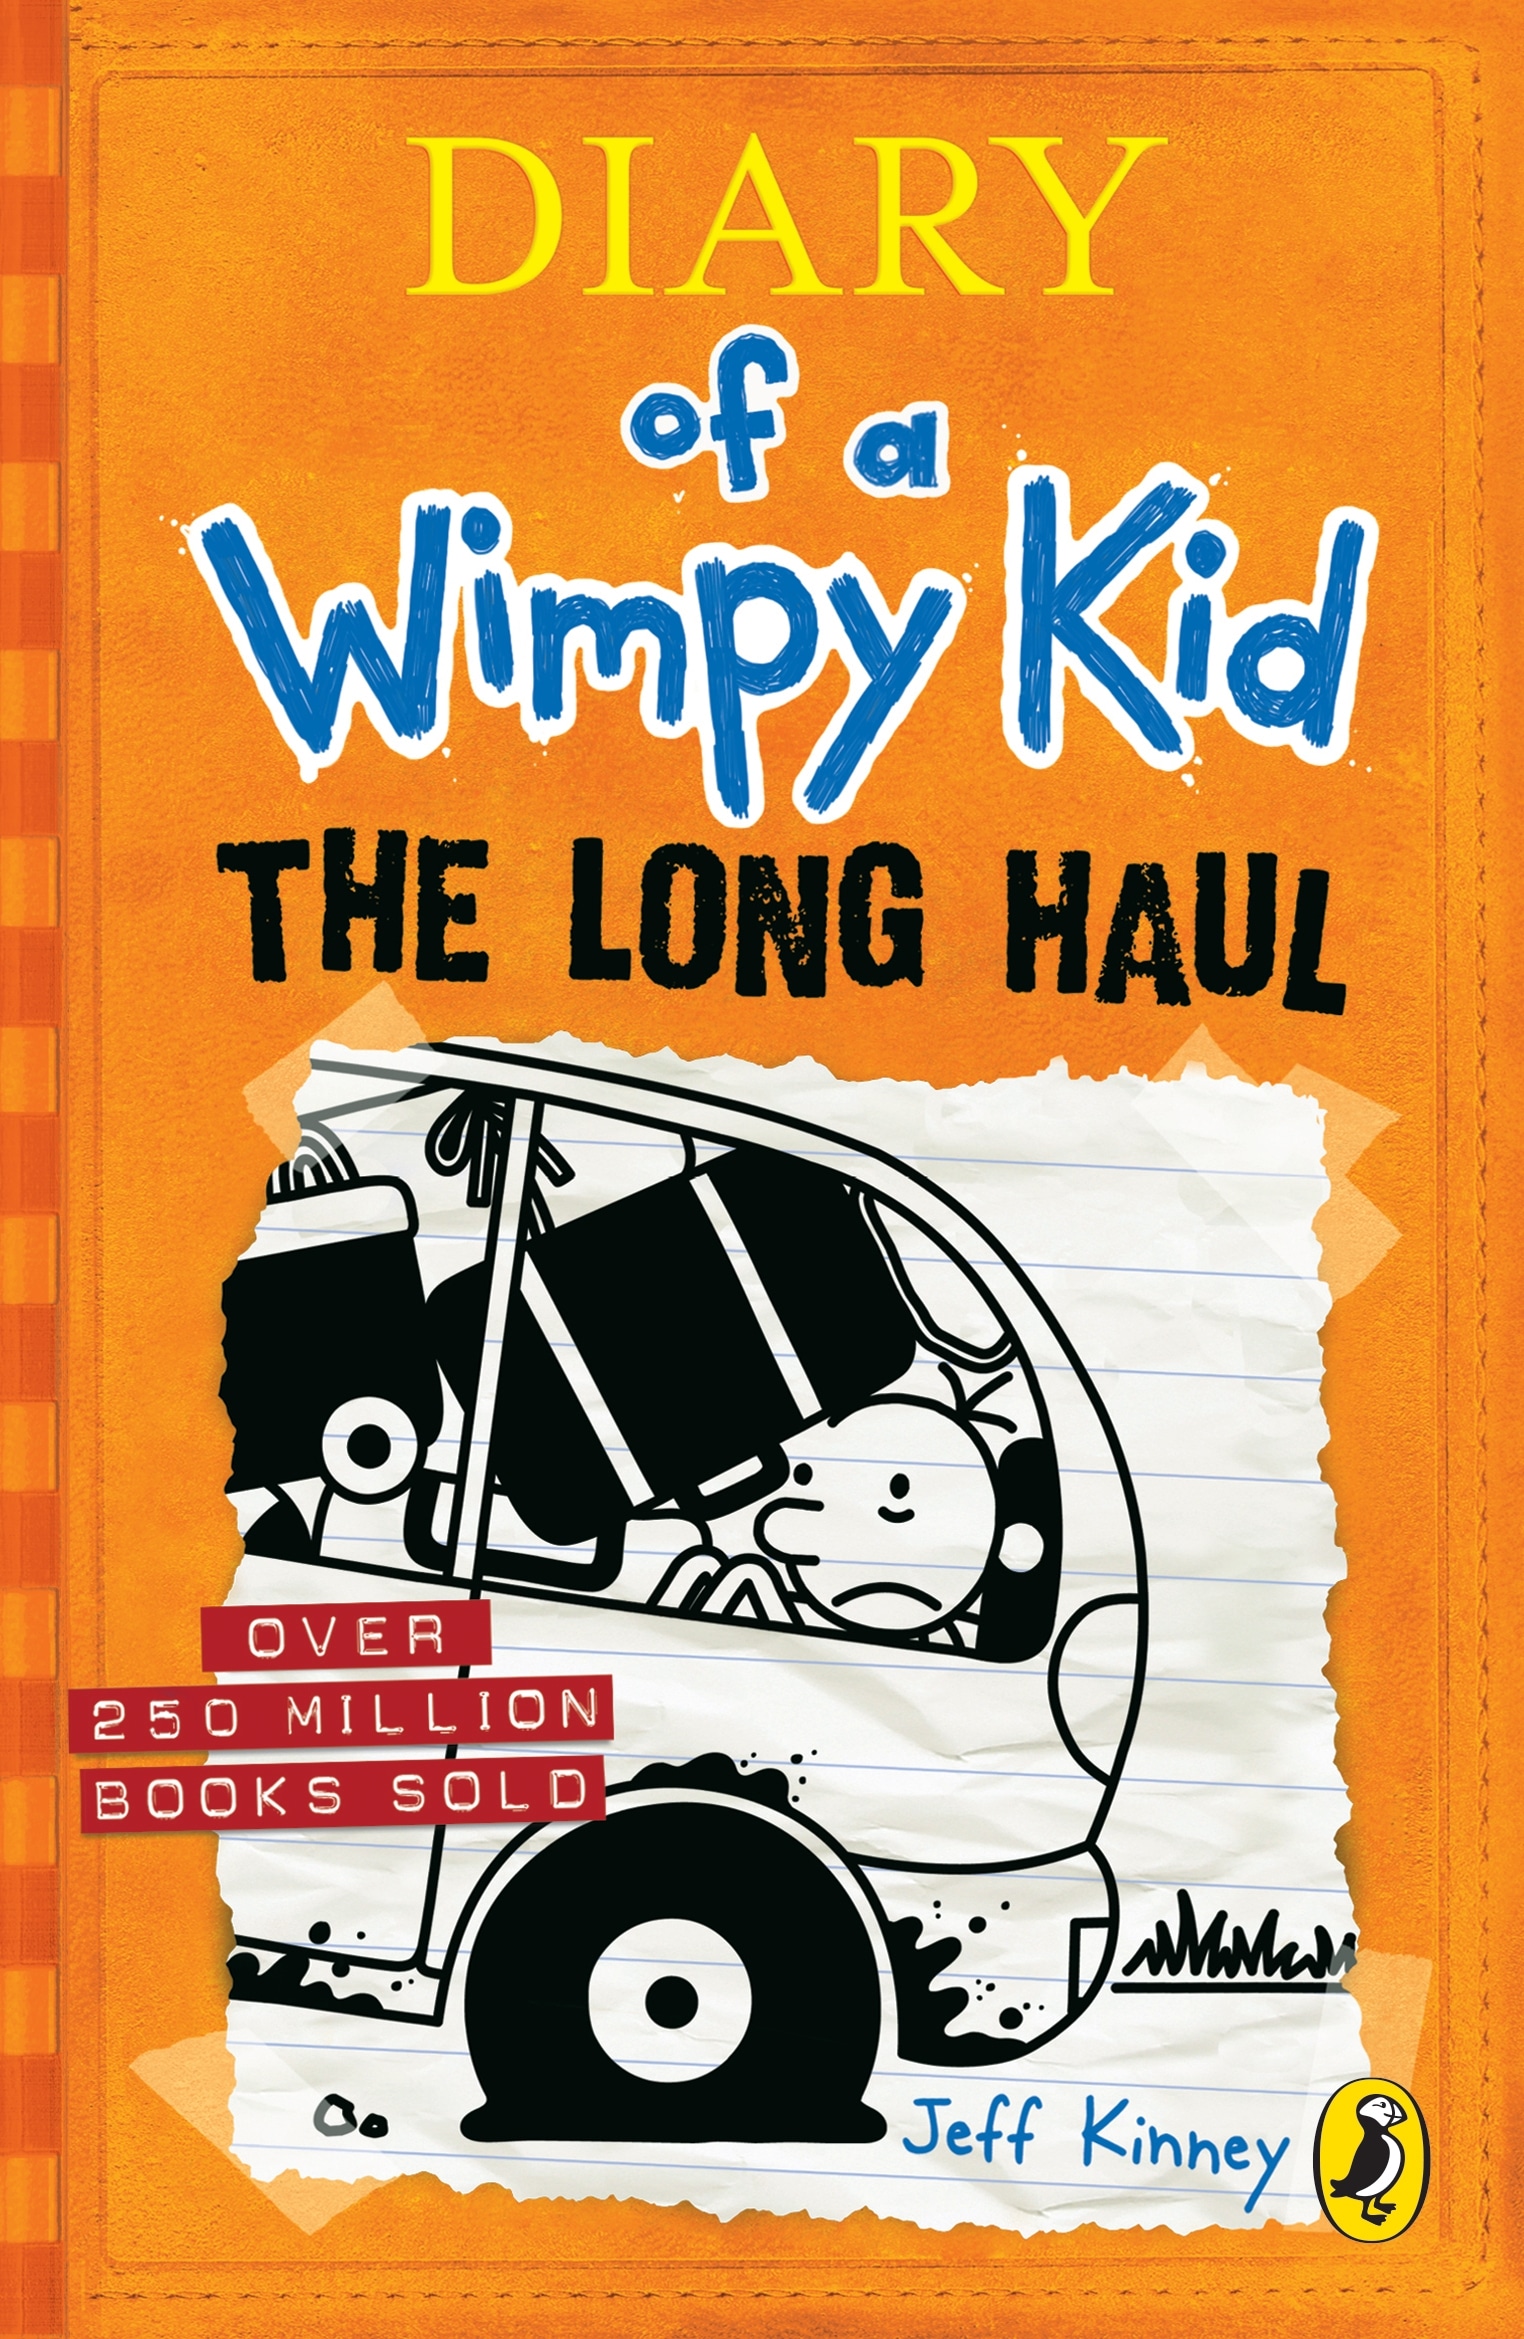 Book “Diary of a Wimpy Kid: The Long Haul (Book 9)” by Jeff Kinney — January 28, 2016